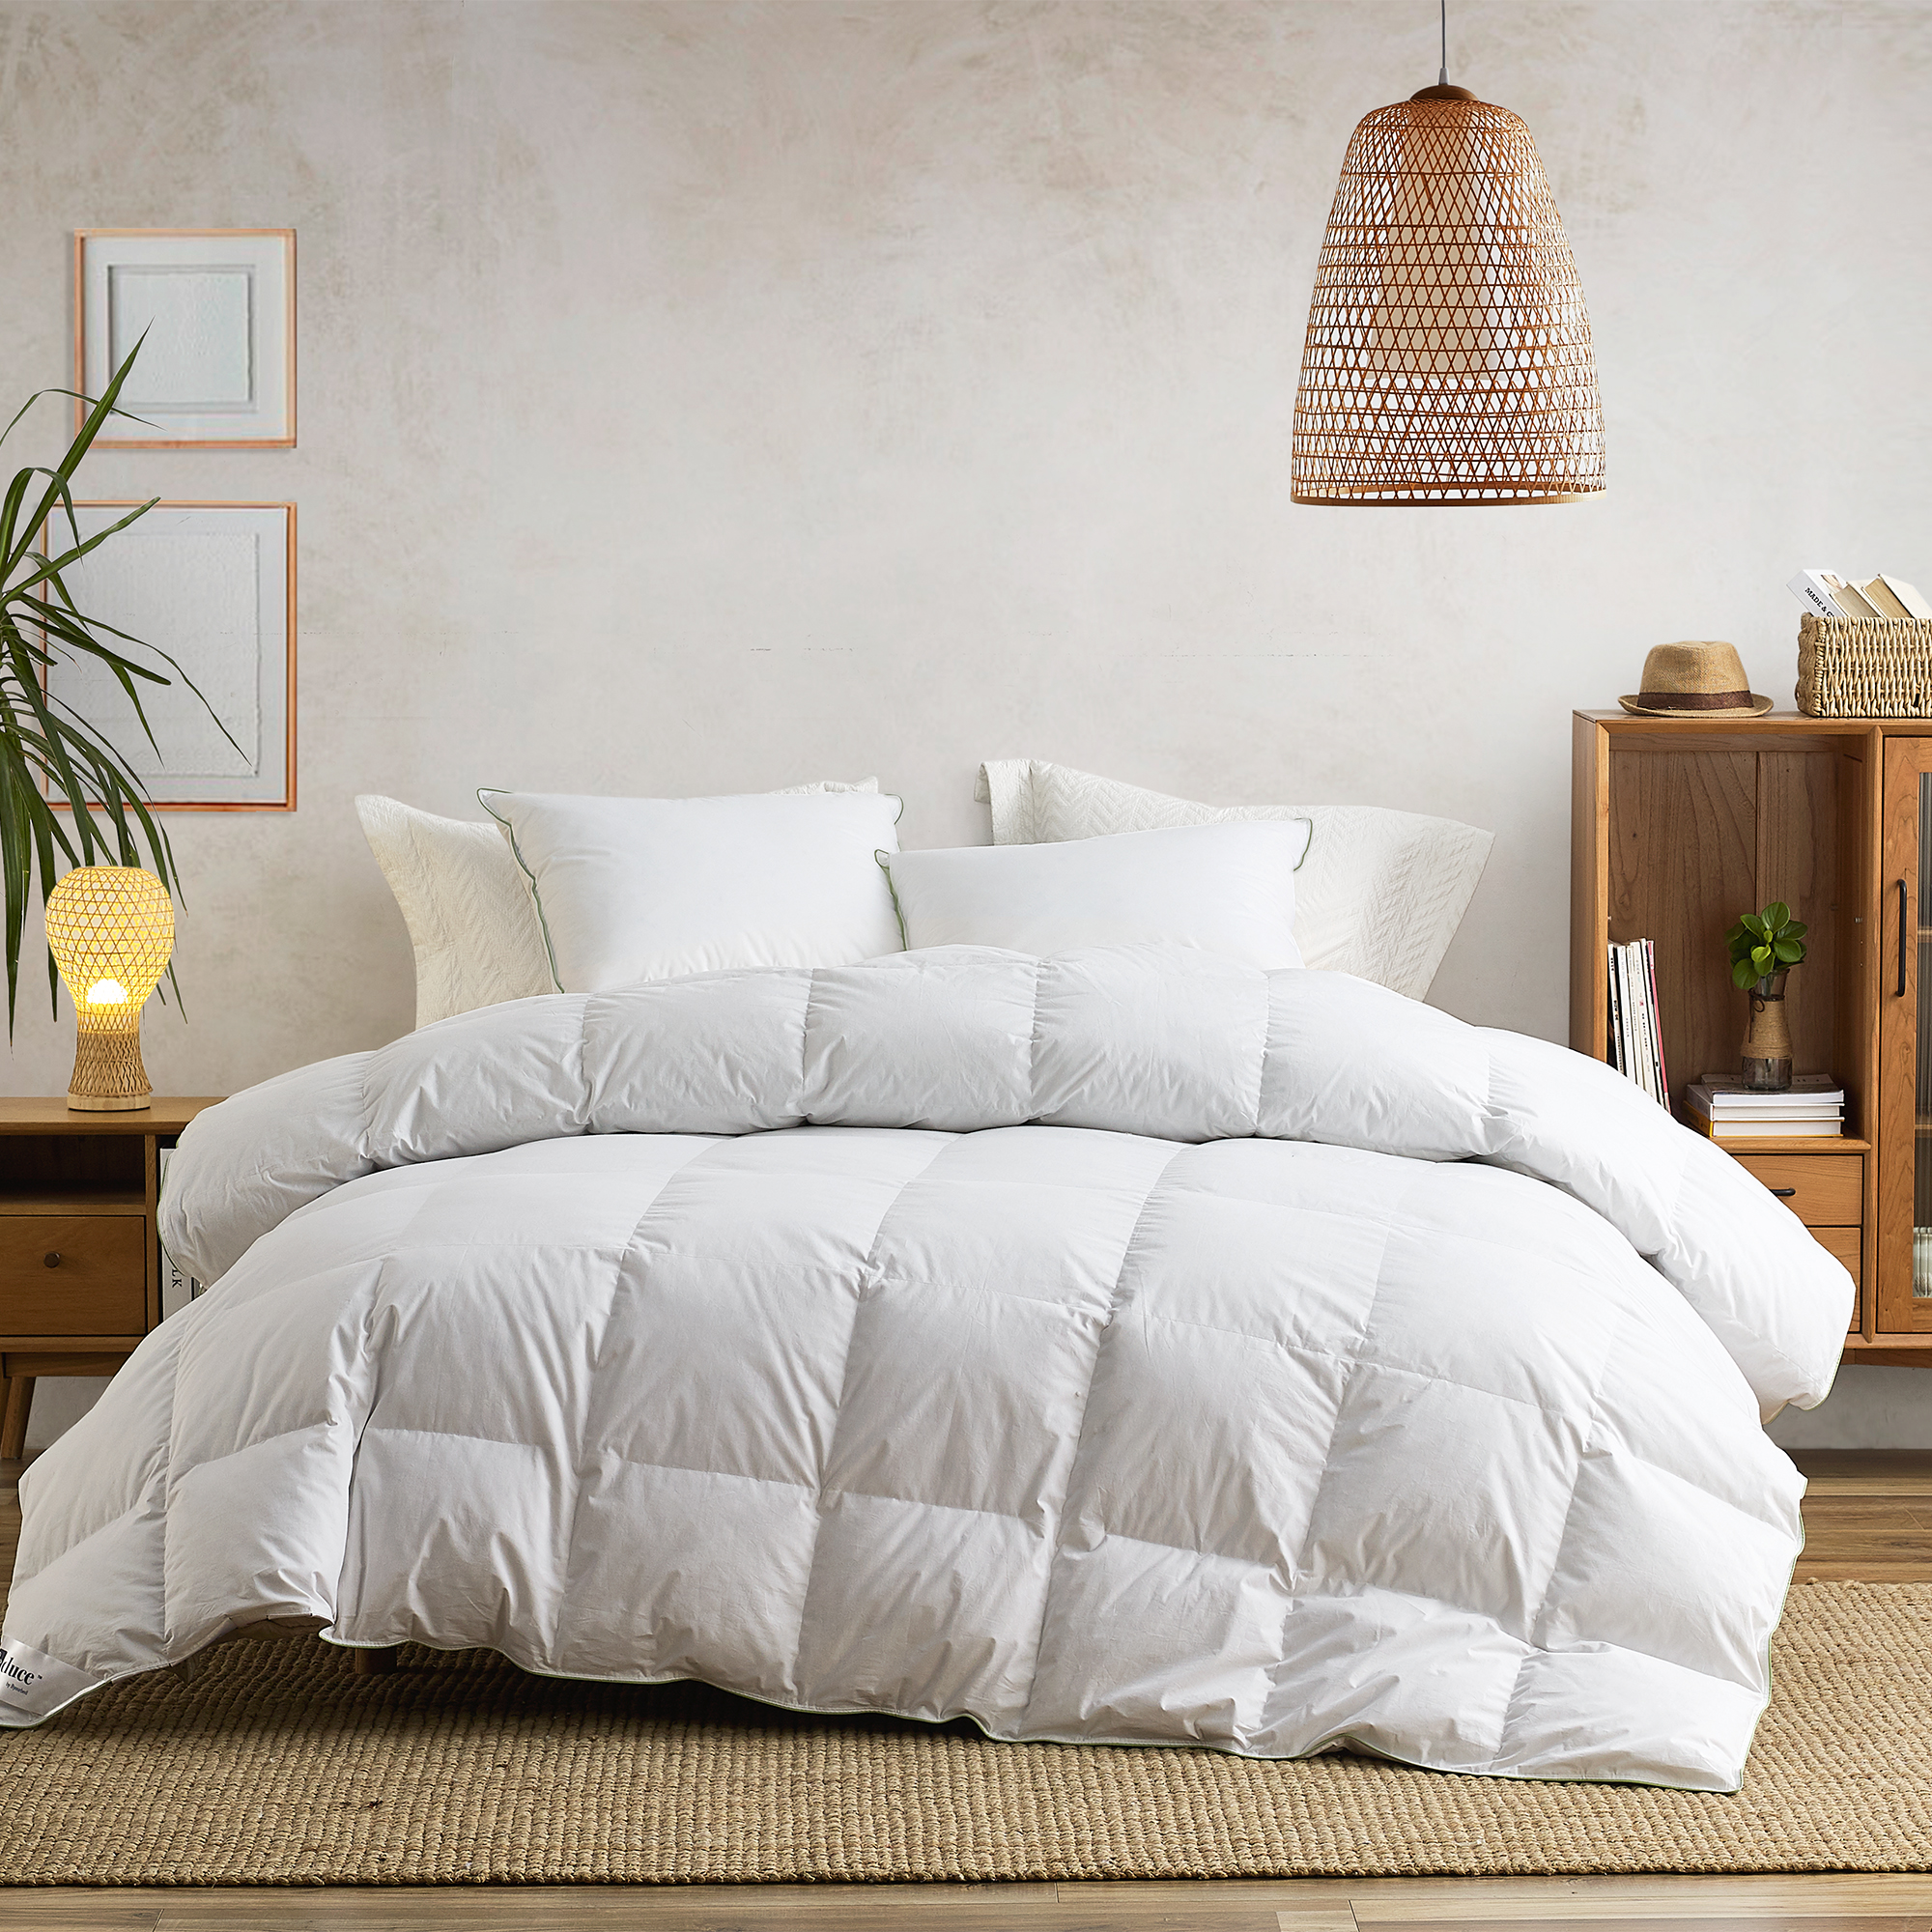 Recycled King Bedding Luxury Down and Feather European Made Comforter for King Pillow Top Mattress